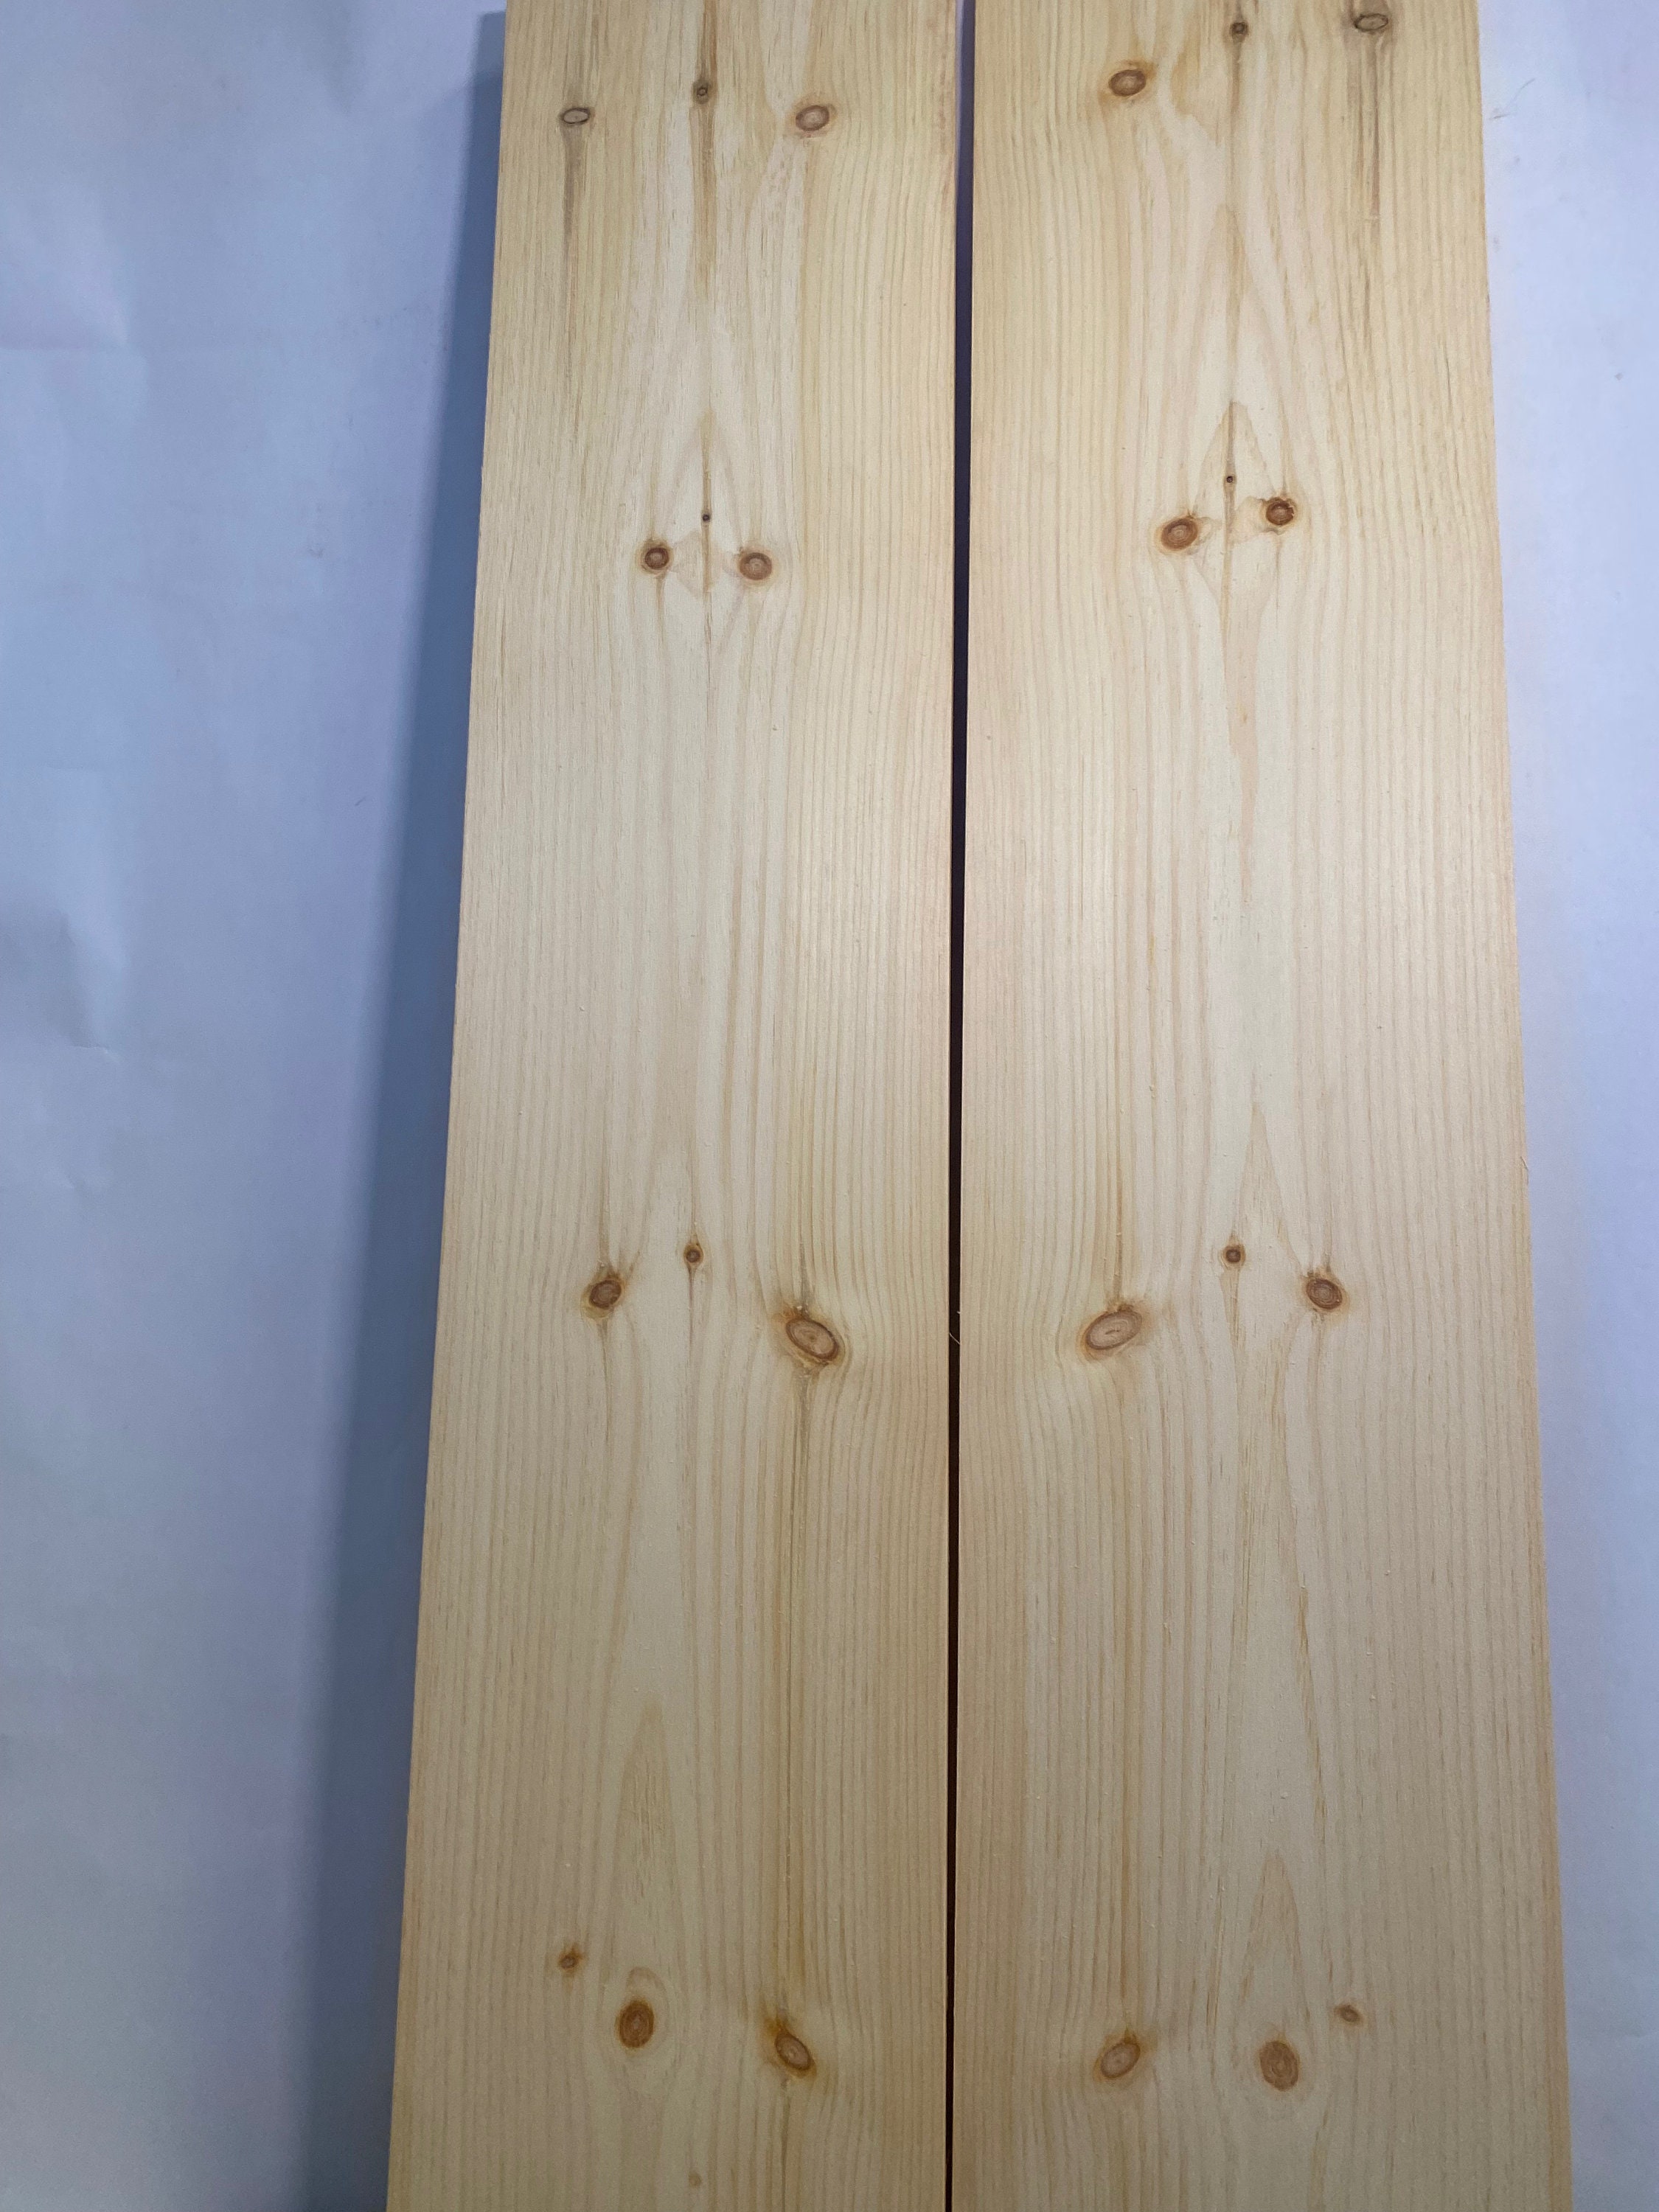 1/4 X 5 X 24 Knotty Pine Wood Boards imperfect Laser Engraving, CNC,  Scrollsawing, Signs, DIY Crafts, Hobbies Flat Shipping 